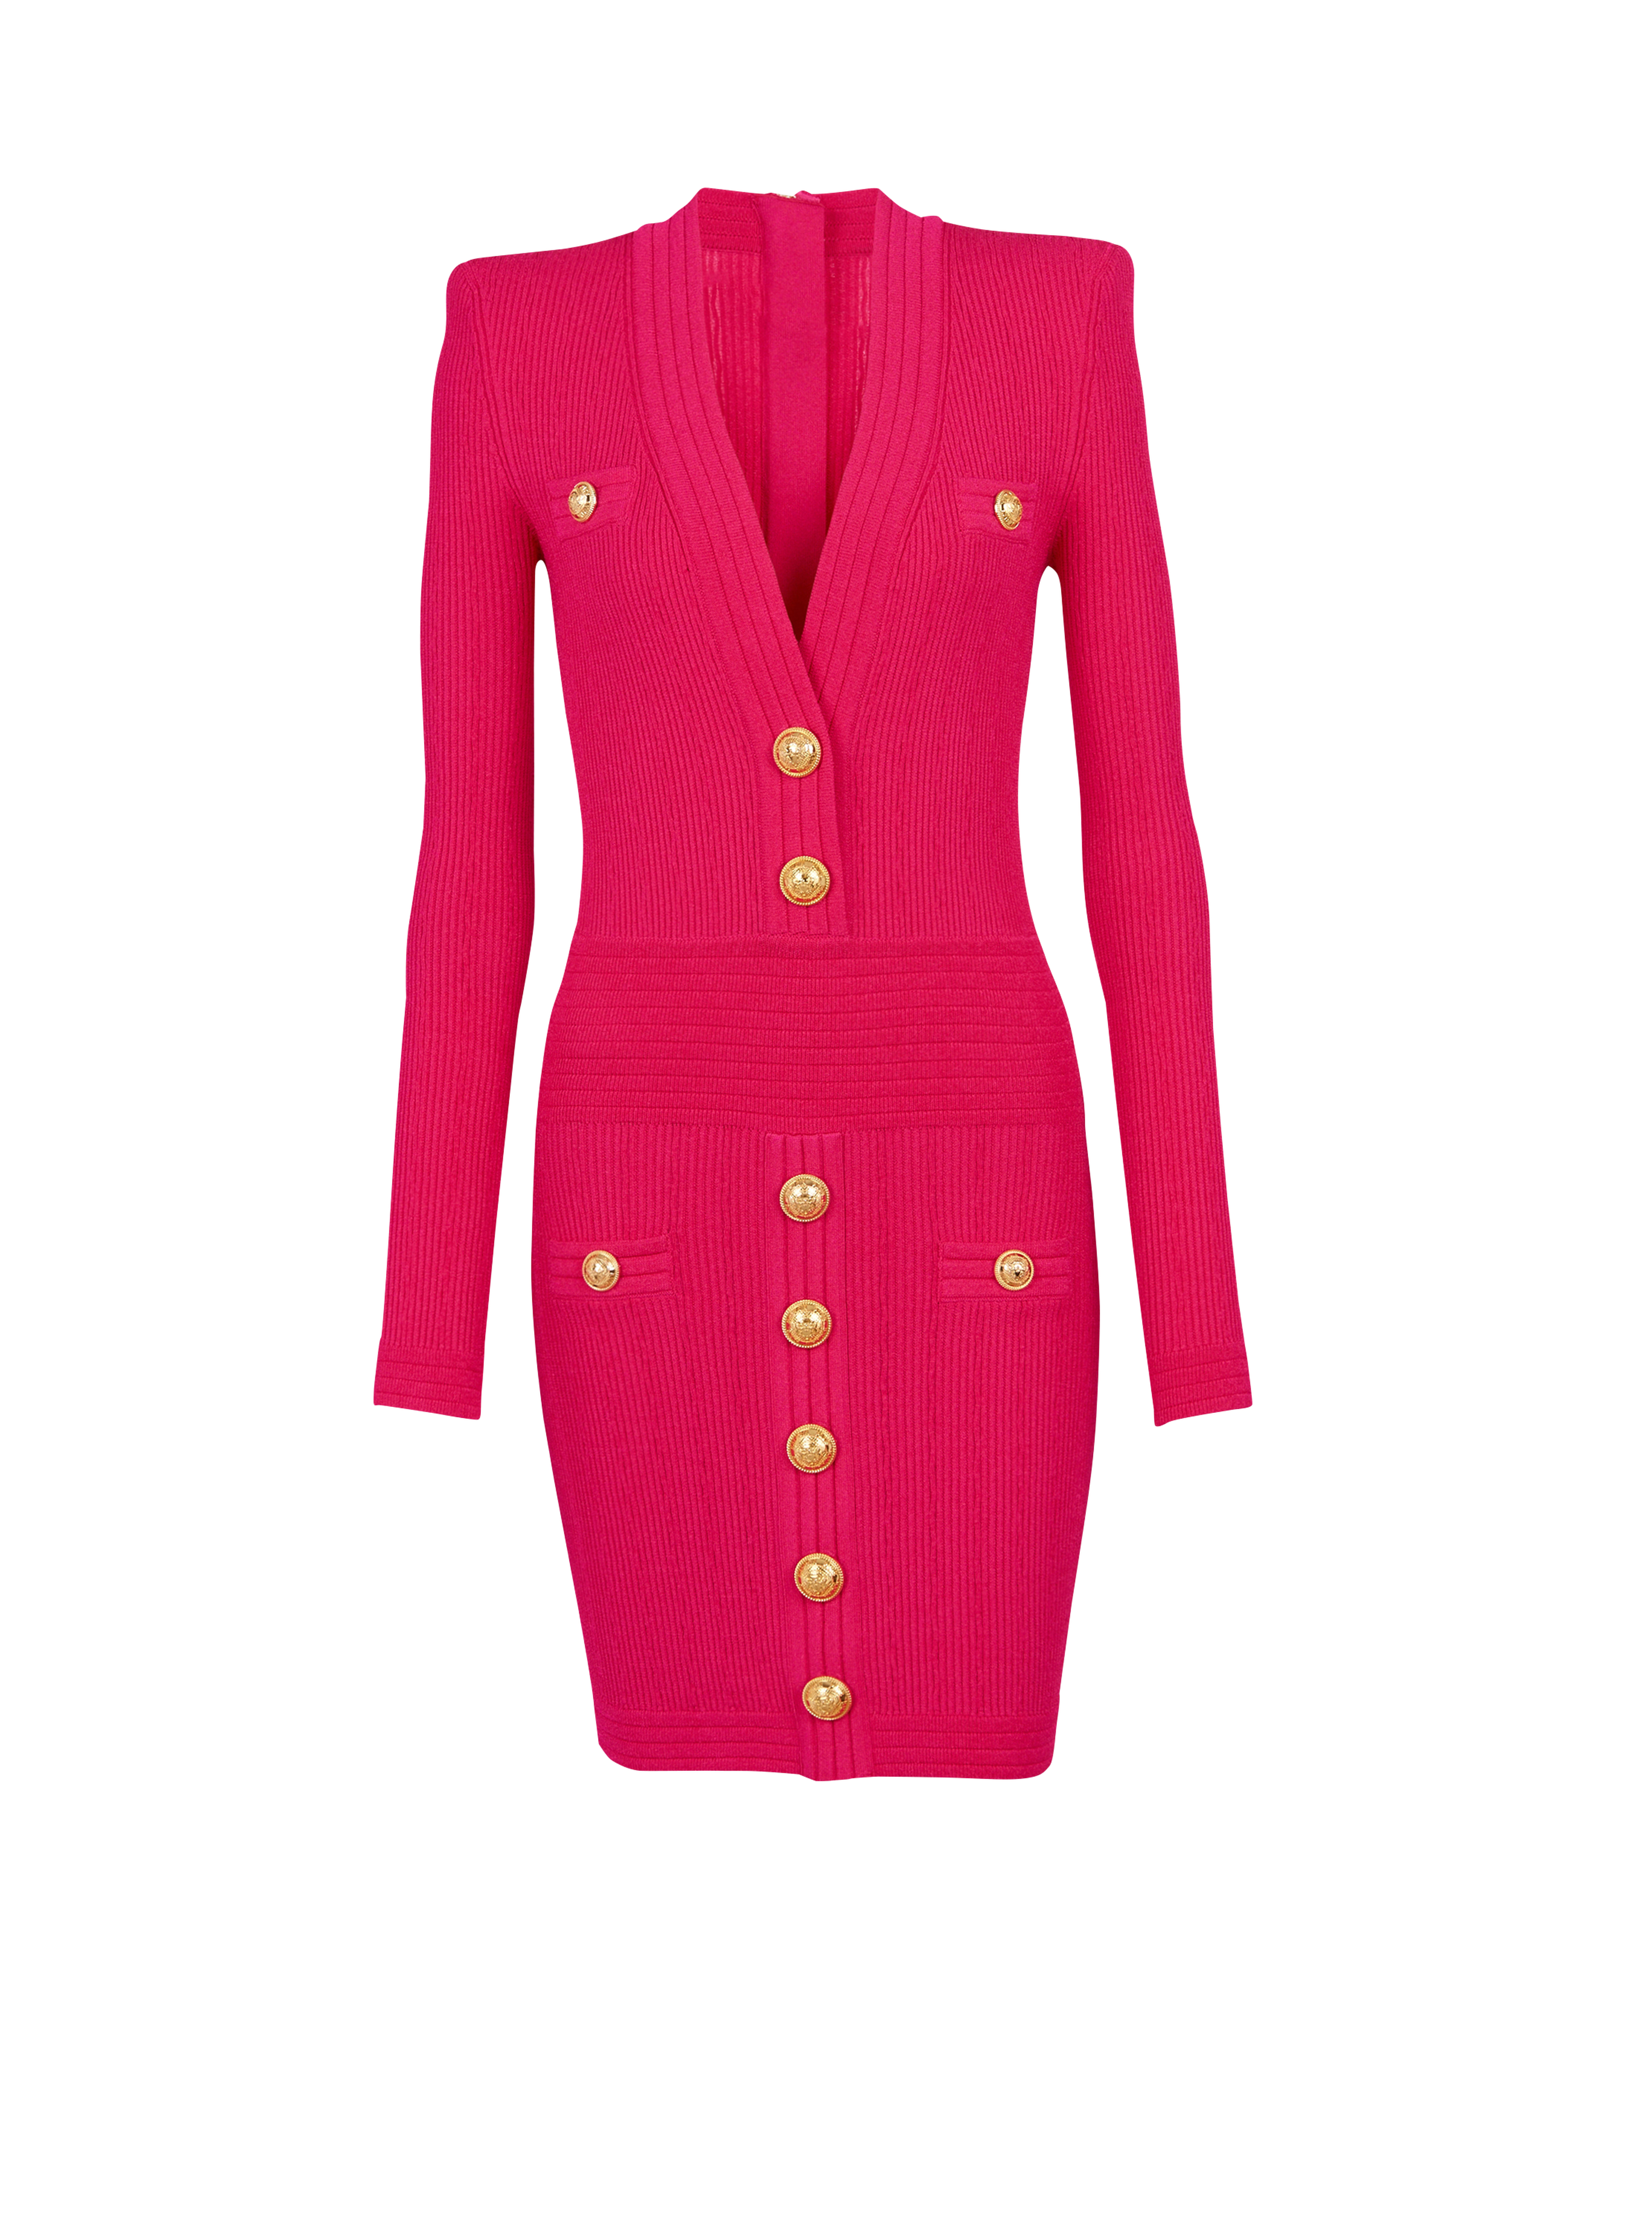 Short eco-designed knit dress with gold-tone buttons, pink